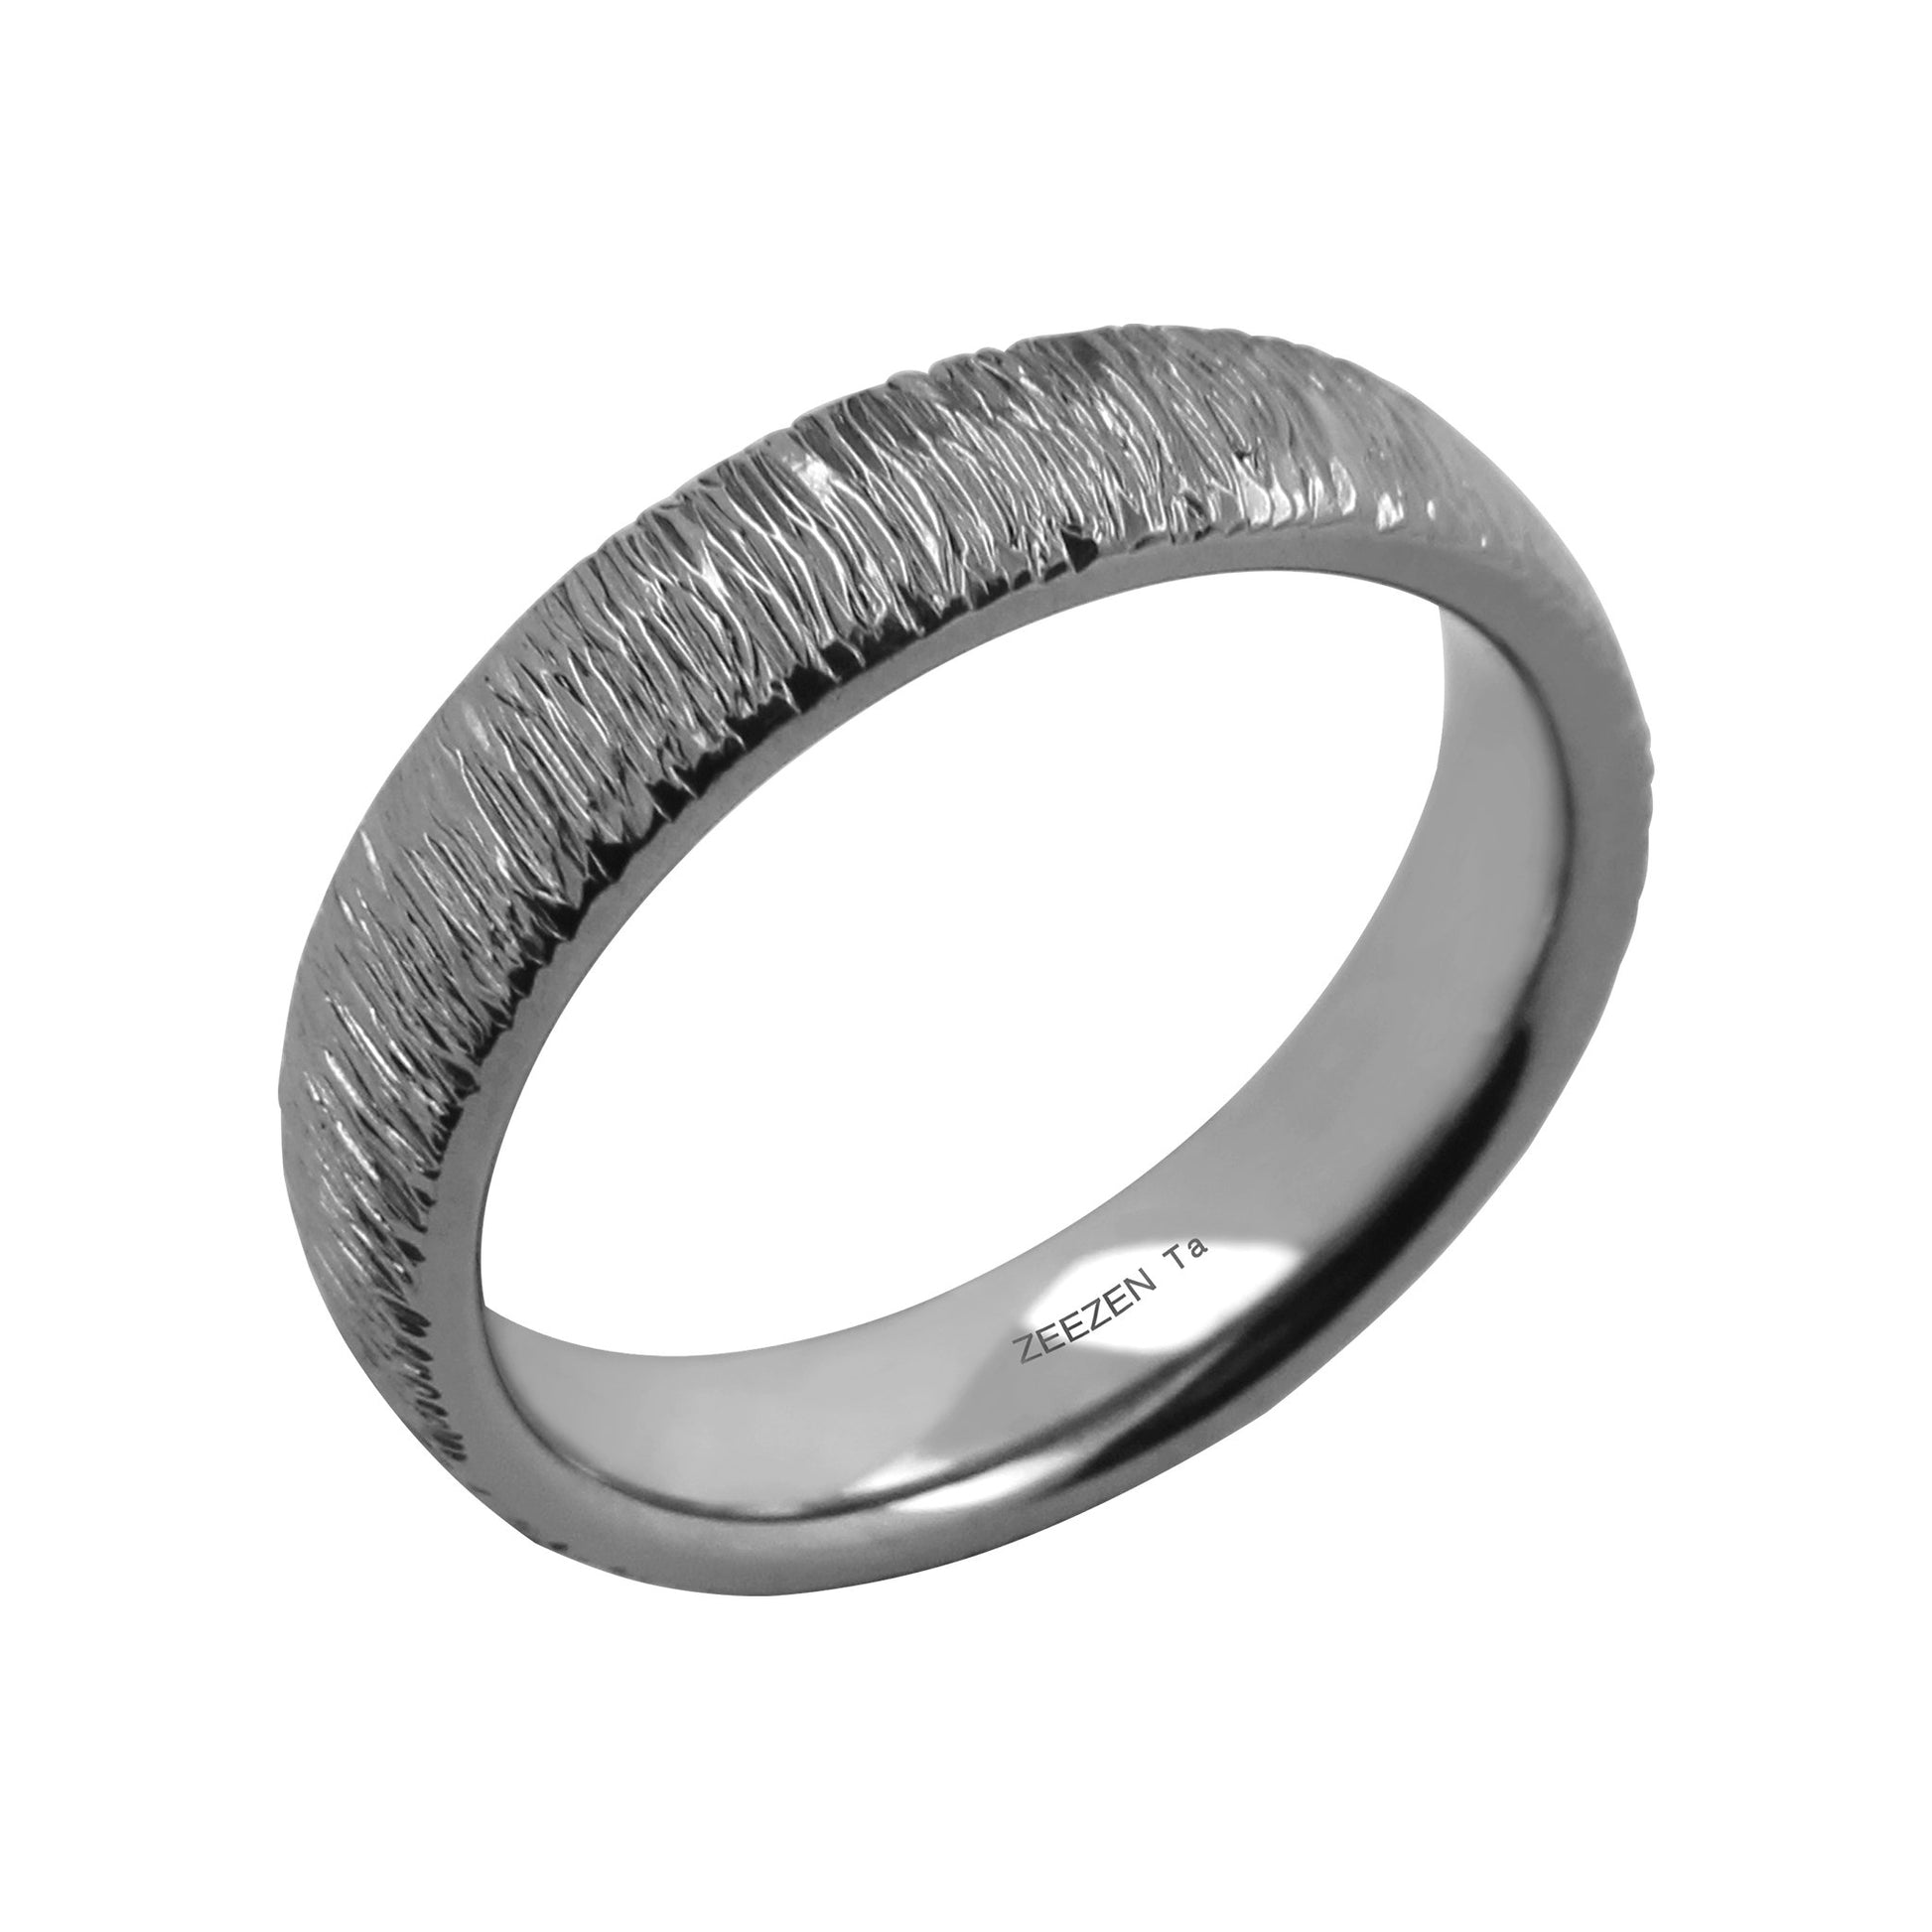 Tantalum Ring w/o min. Corner Hammered Polished w/ Small Ruffle Pattern. Ring profile: width: 5.5 mm || height: 2.3 mm. Side view